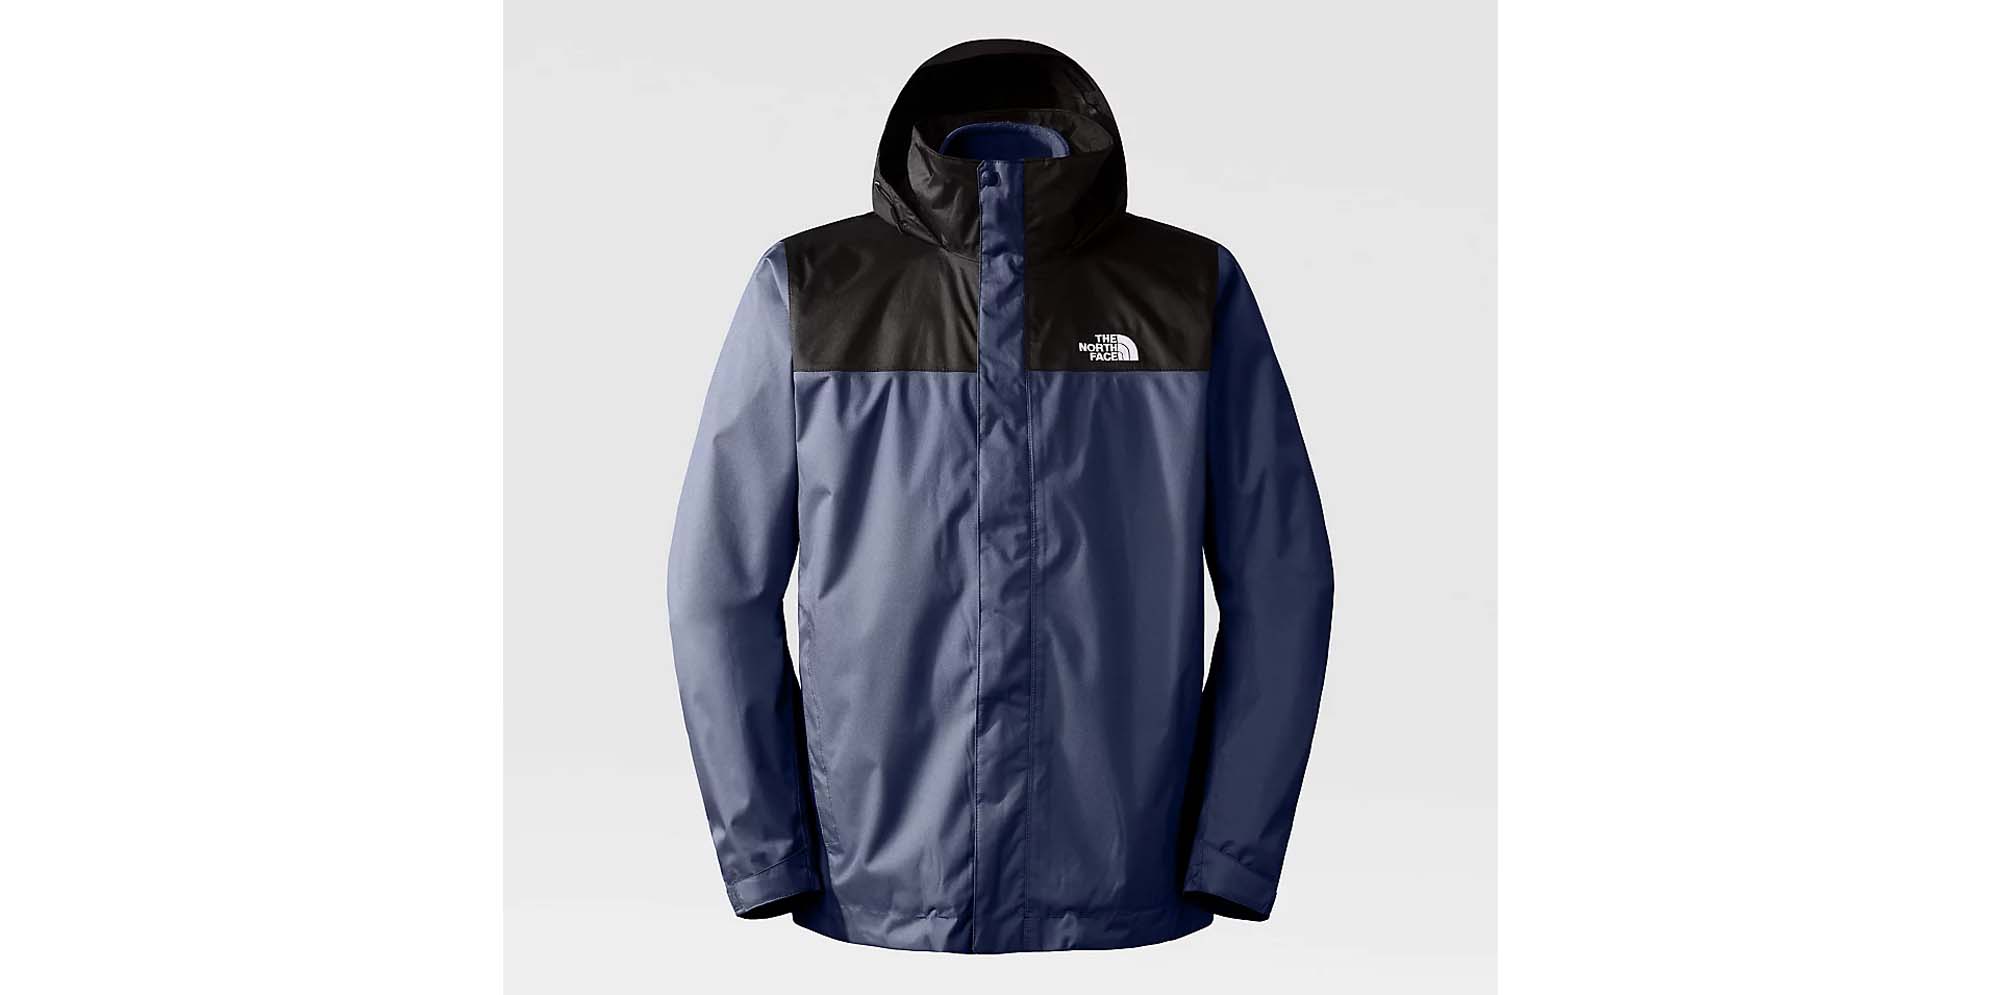 THE NORTH FACE evolve li triclimate jacket